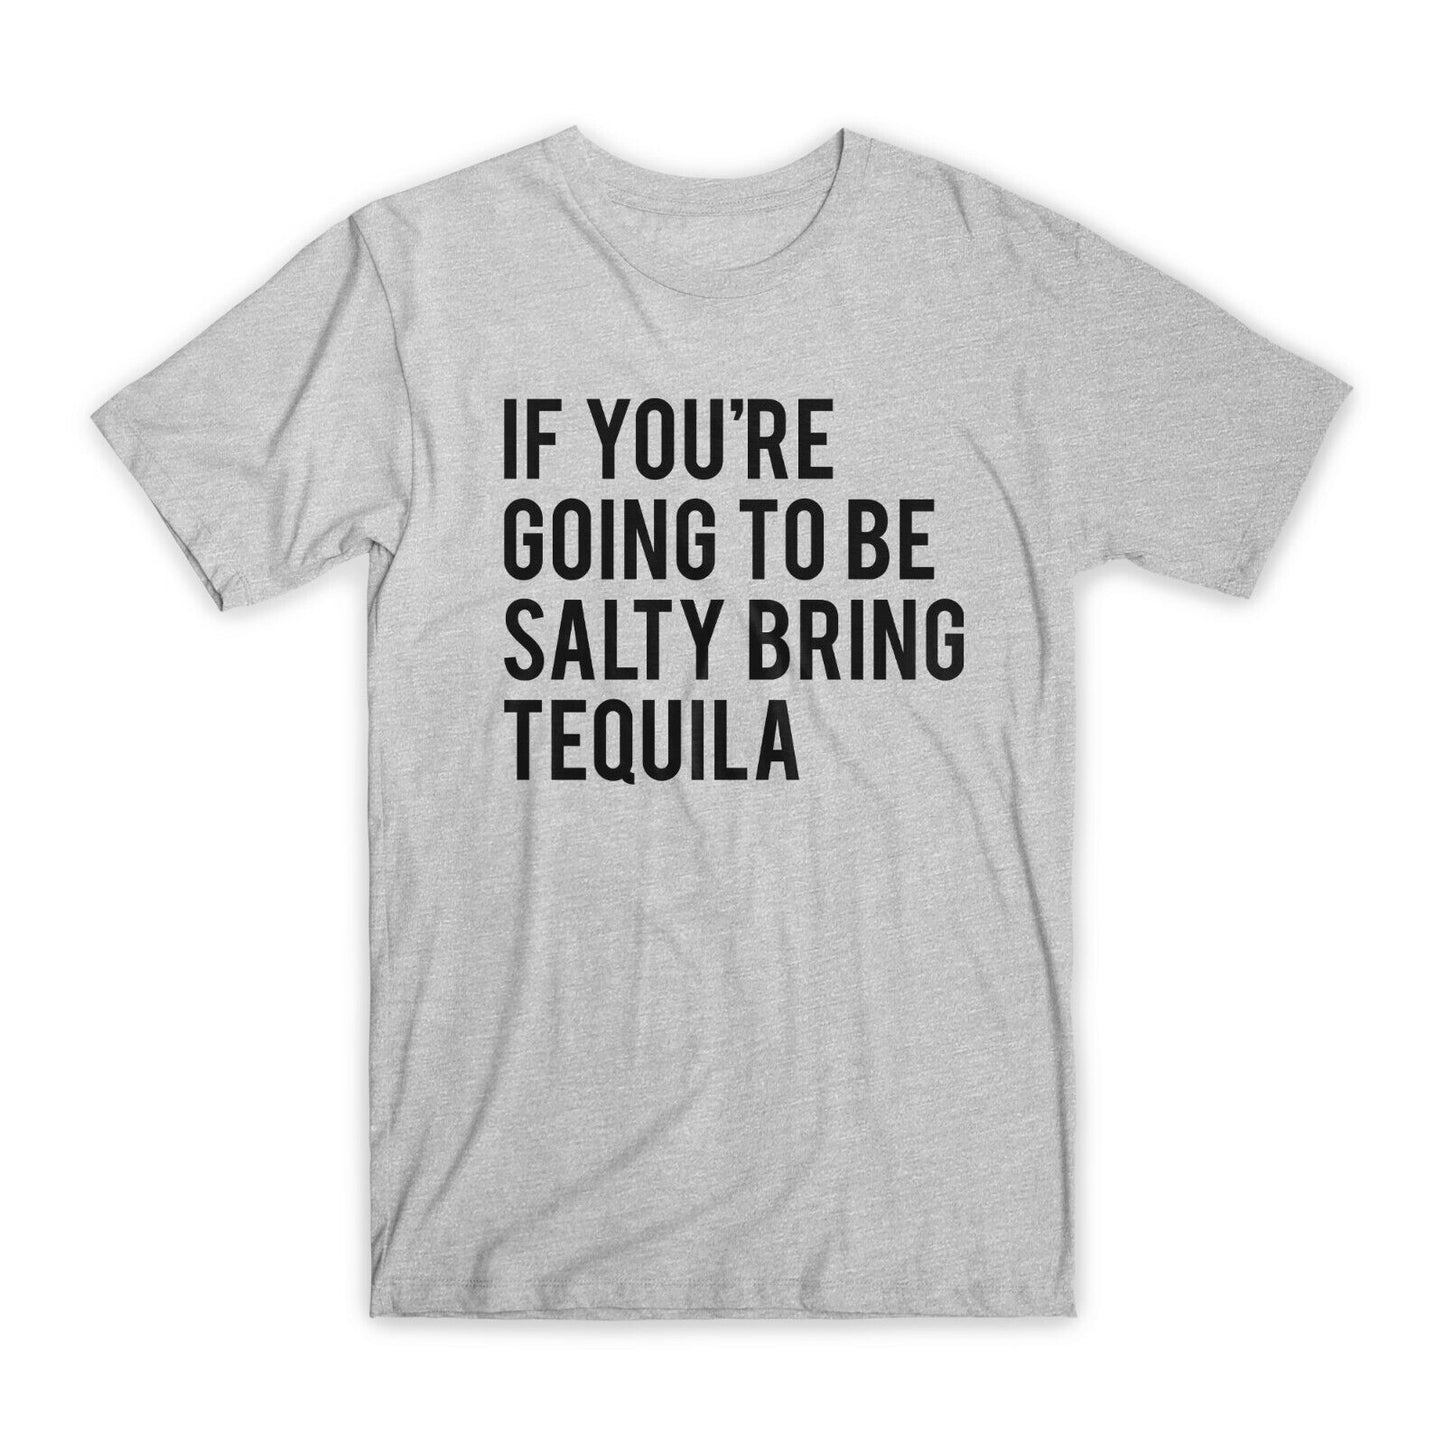 If You're Going To Be Salty Bring Tequila T-Shirt Premium Cotton Funny Tees NEW